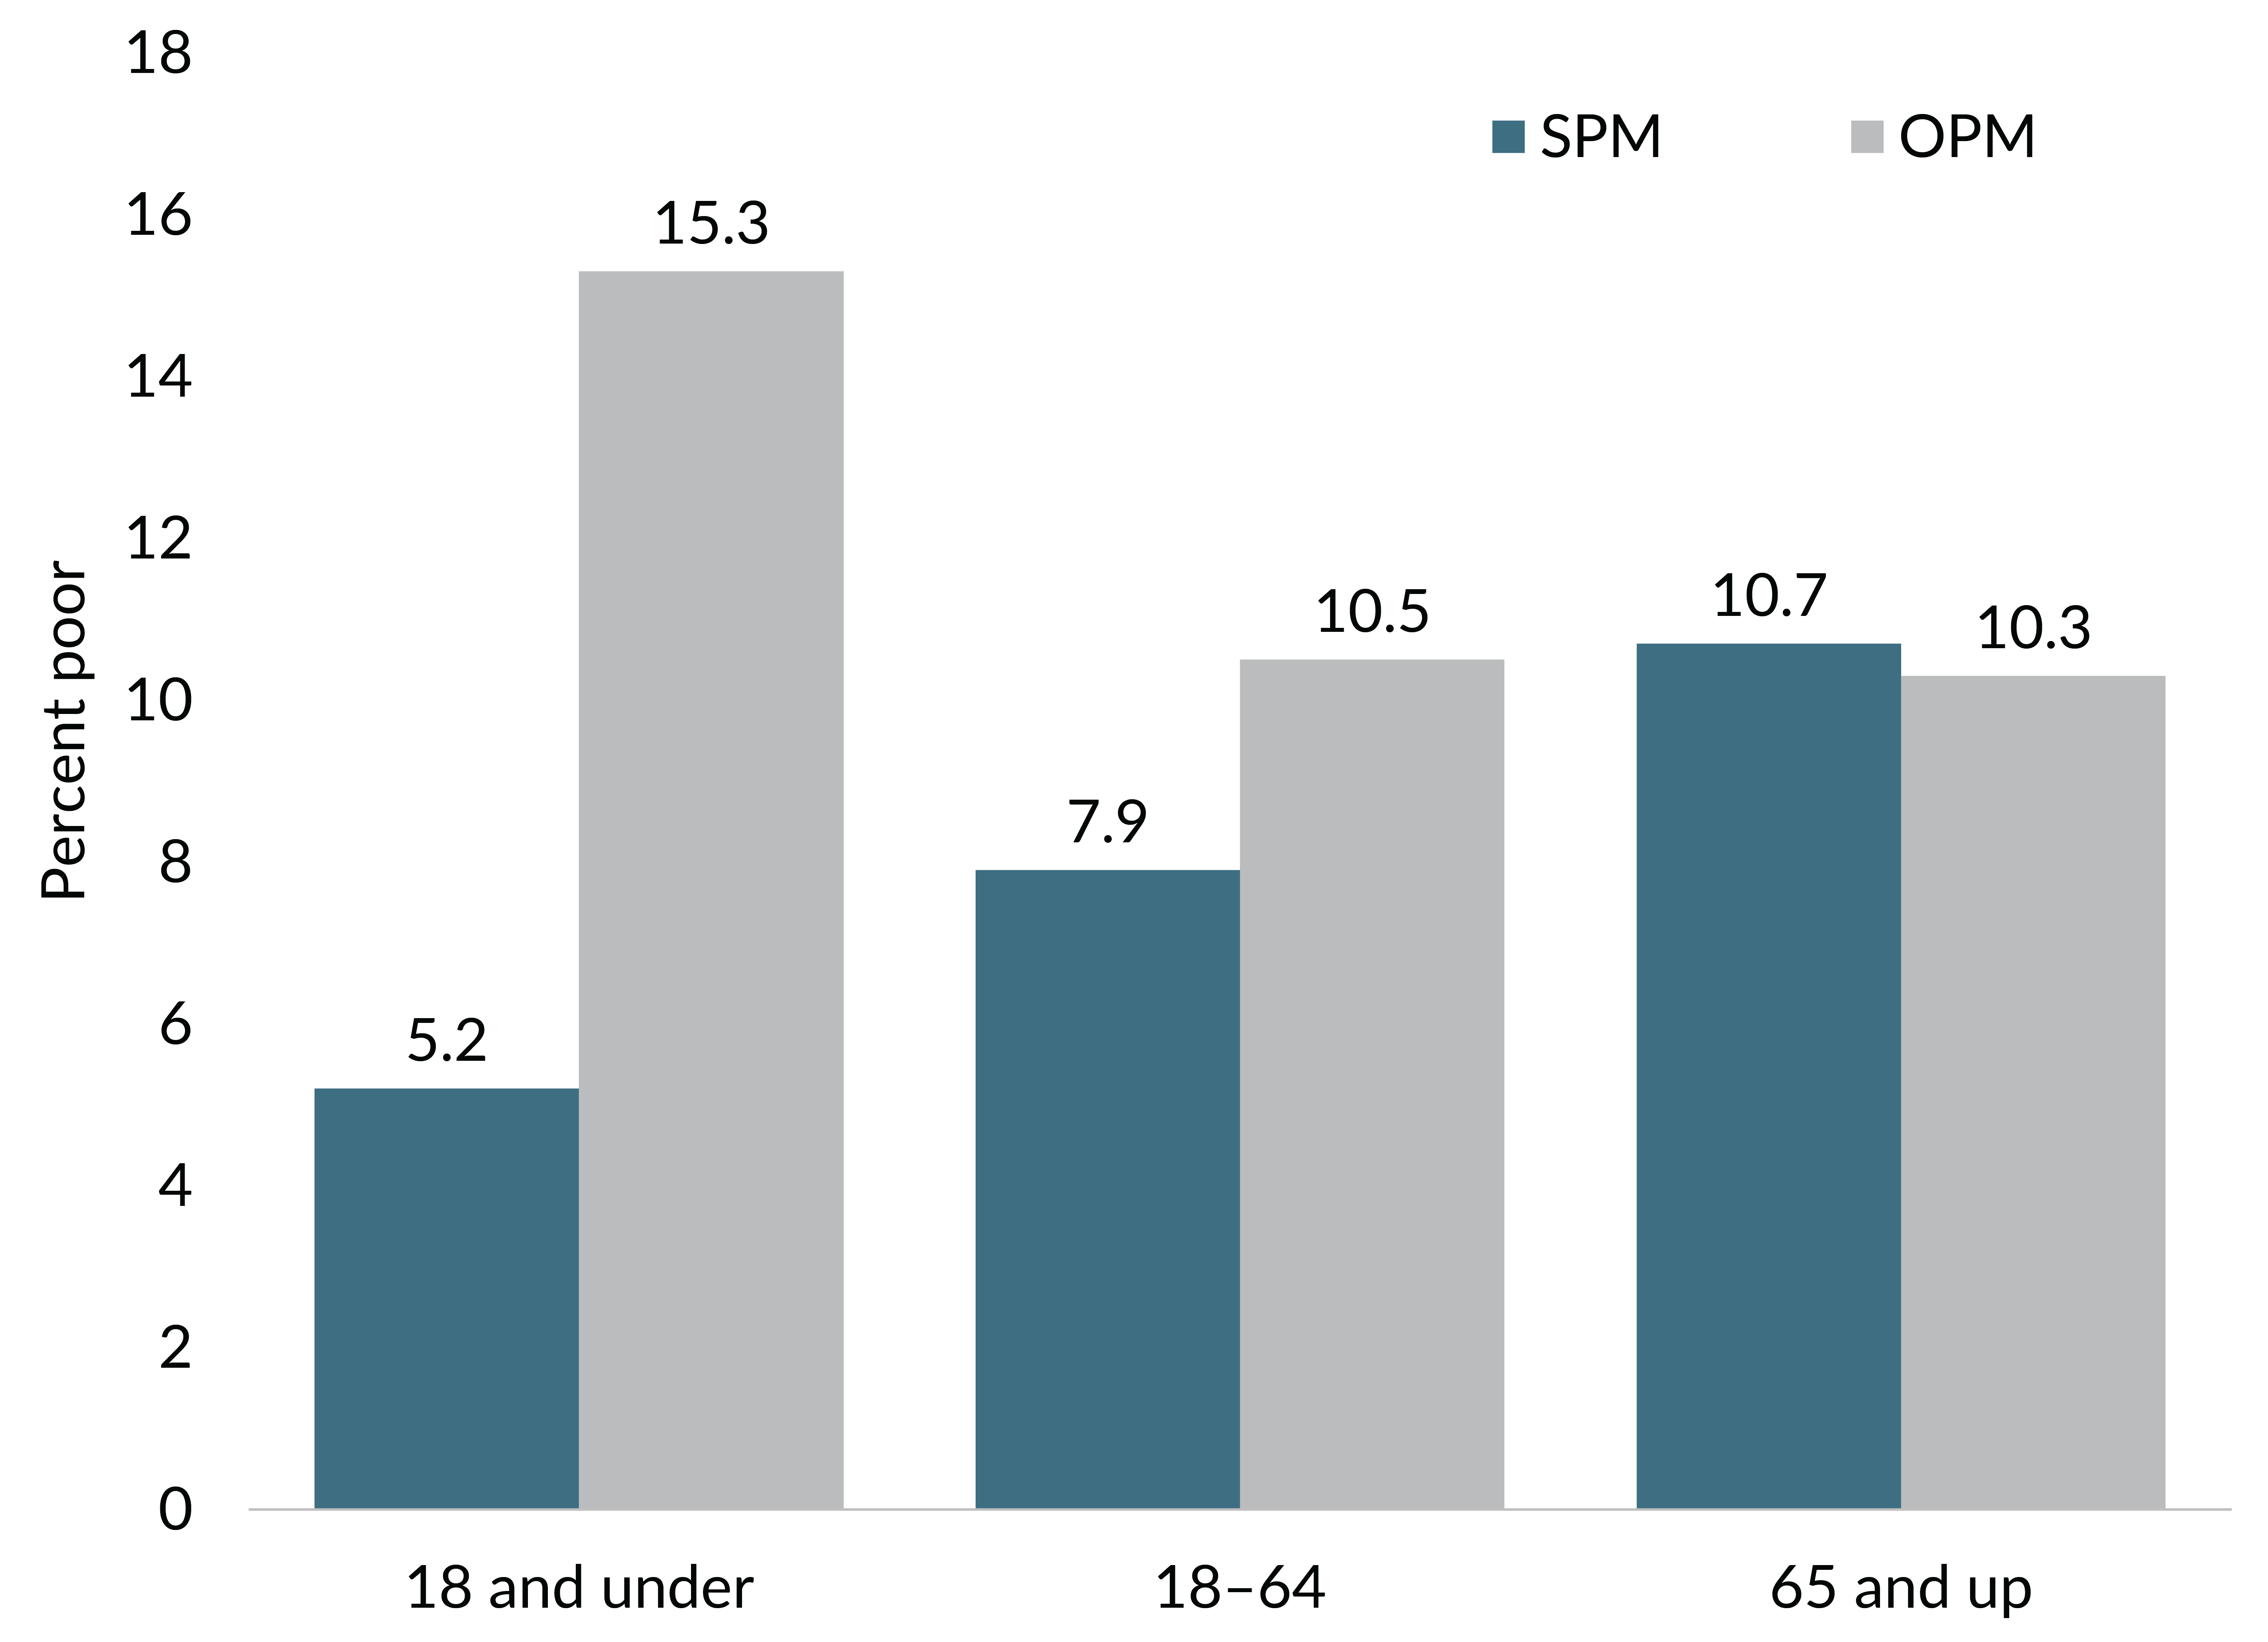 Figure shows column graph with poverty rates under the OPM and SPM for groups aged 18 and under, 18 to 64, and 65 and up.